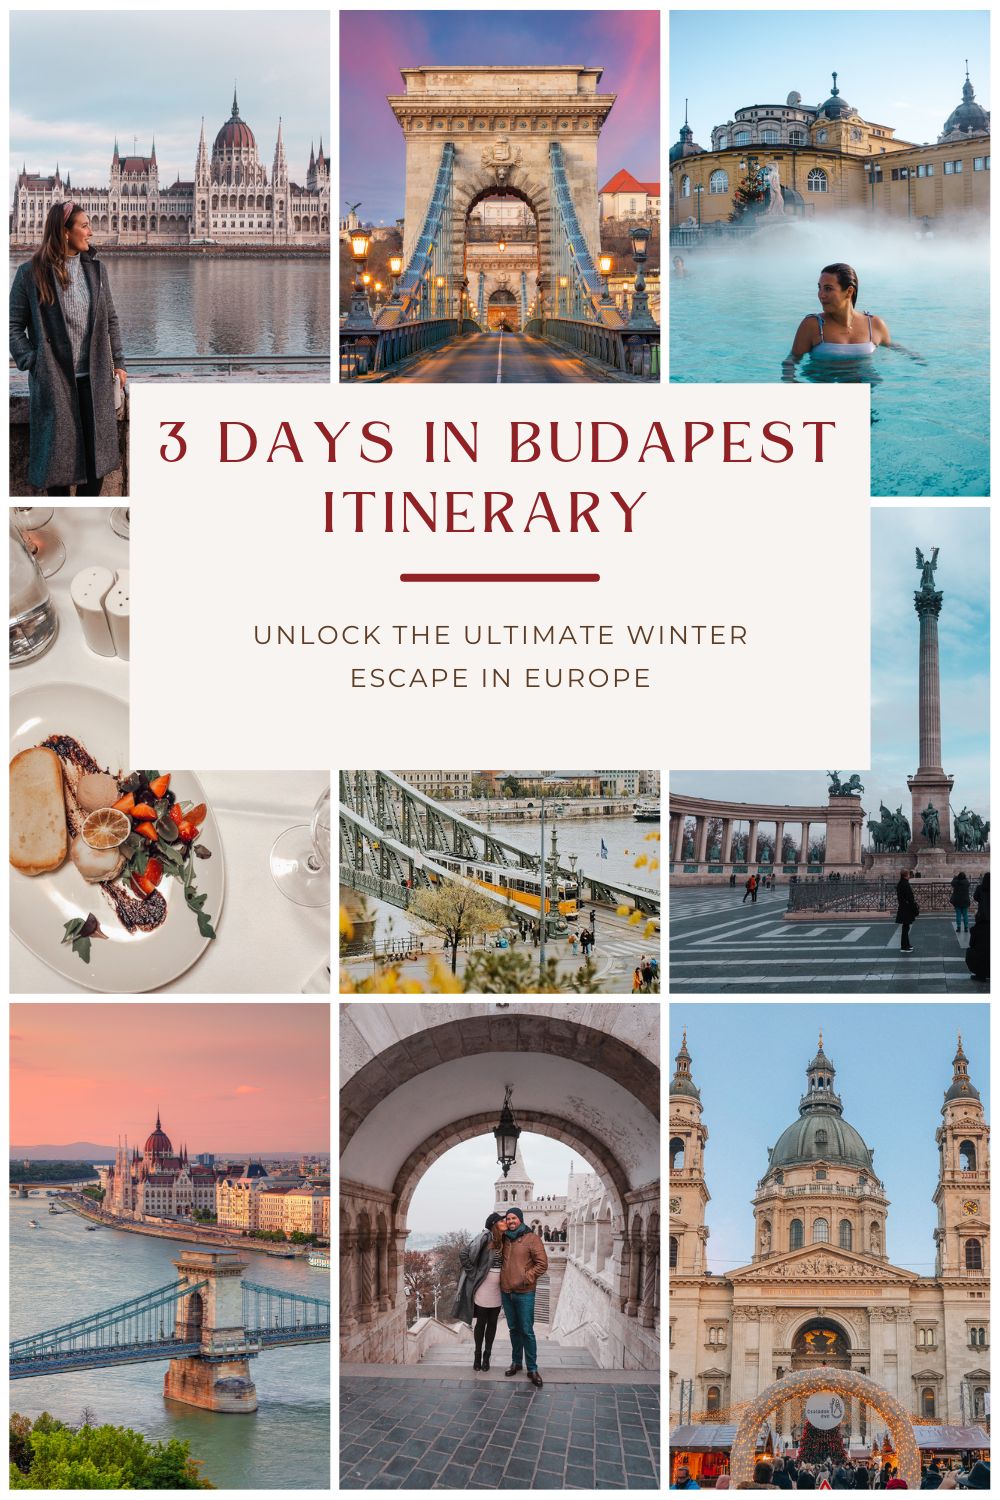 Unlock the Ultimate Winter Escape: 3 Days in Budapest Itinerary Revealed! - 9 photo grid pin